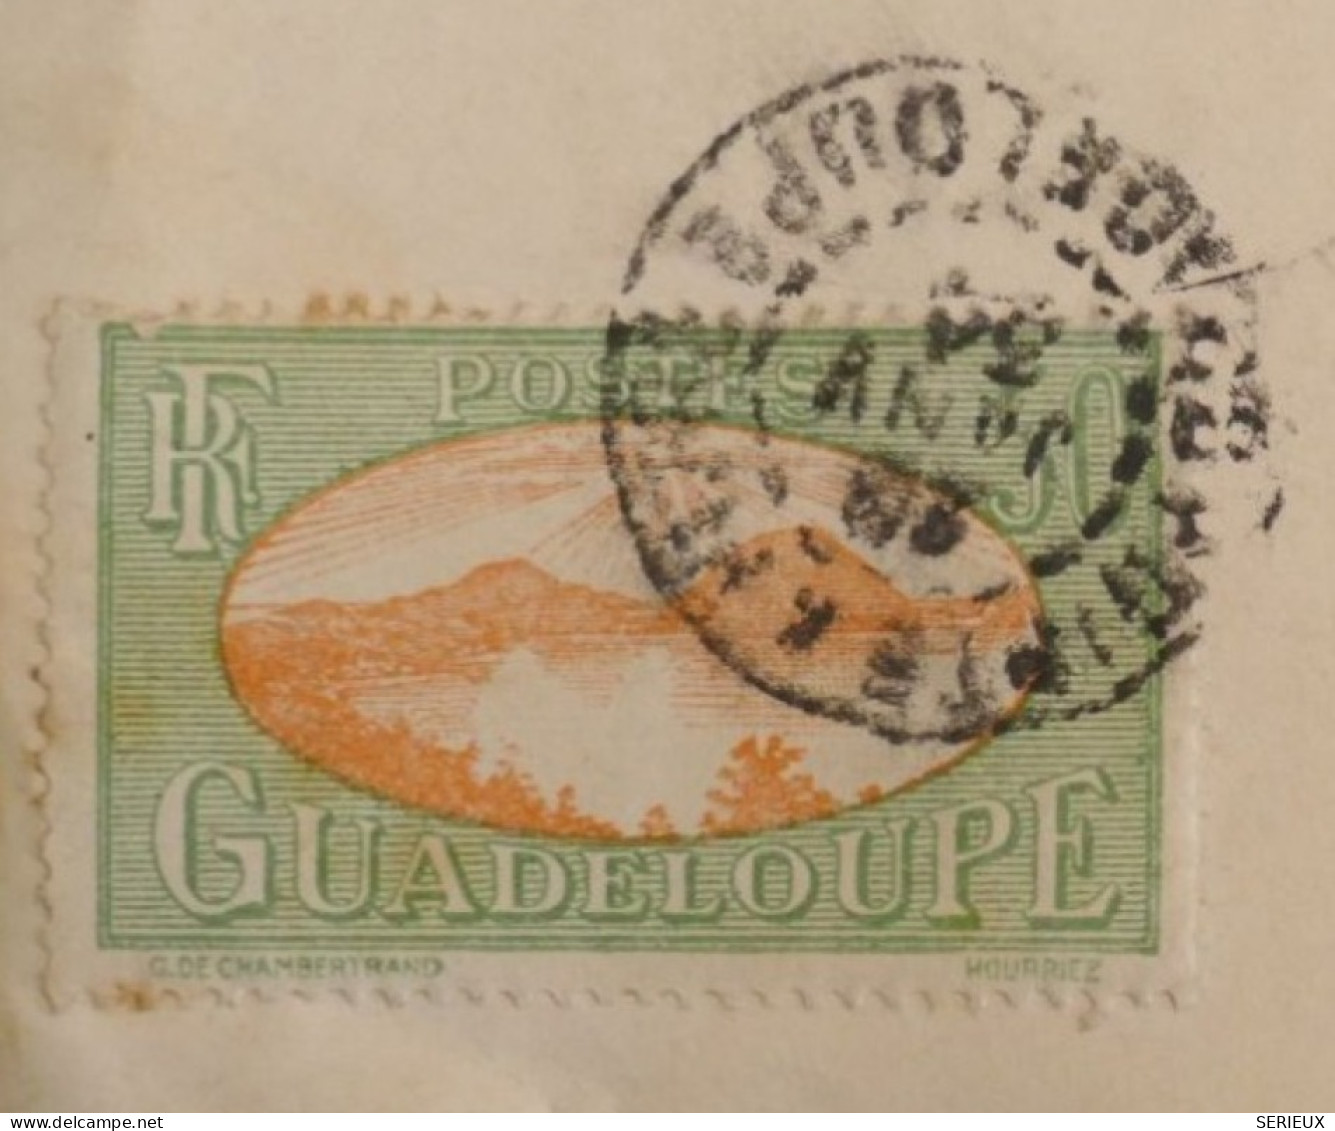 DK 16 GUADELOUPE   BELLE LETTRE COMPLETE  1934 BANQUE  POINTE A PITRE   A  TROYES   FRANCE + +AFF. INTERESSANT+++ + - Covers & Documents